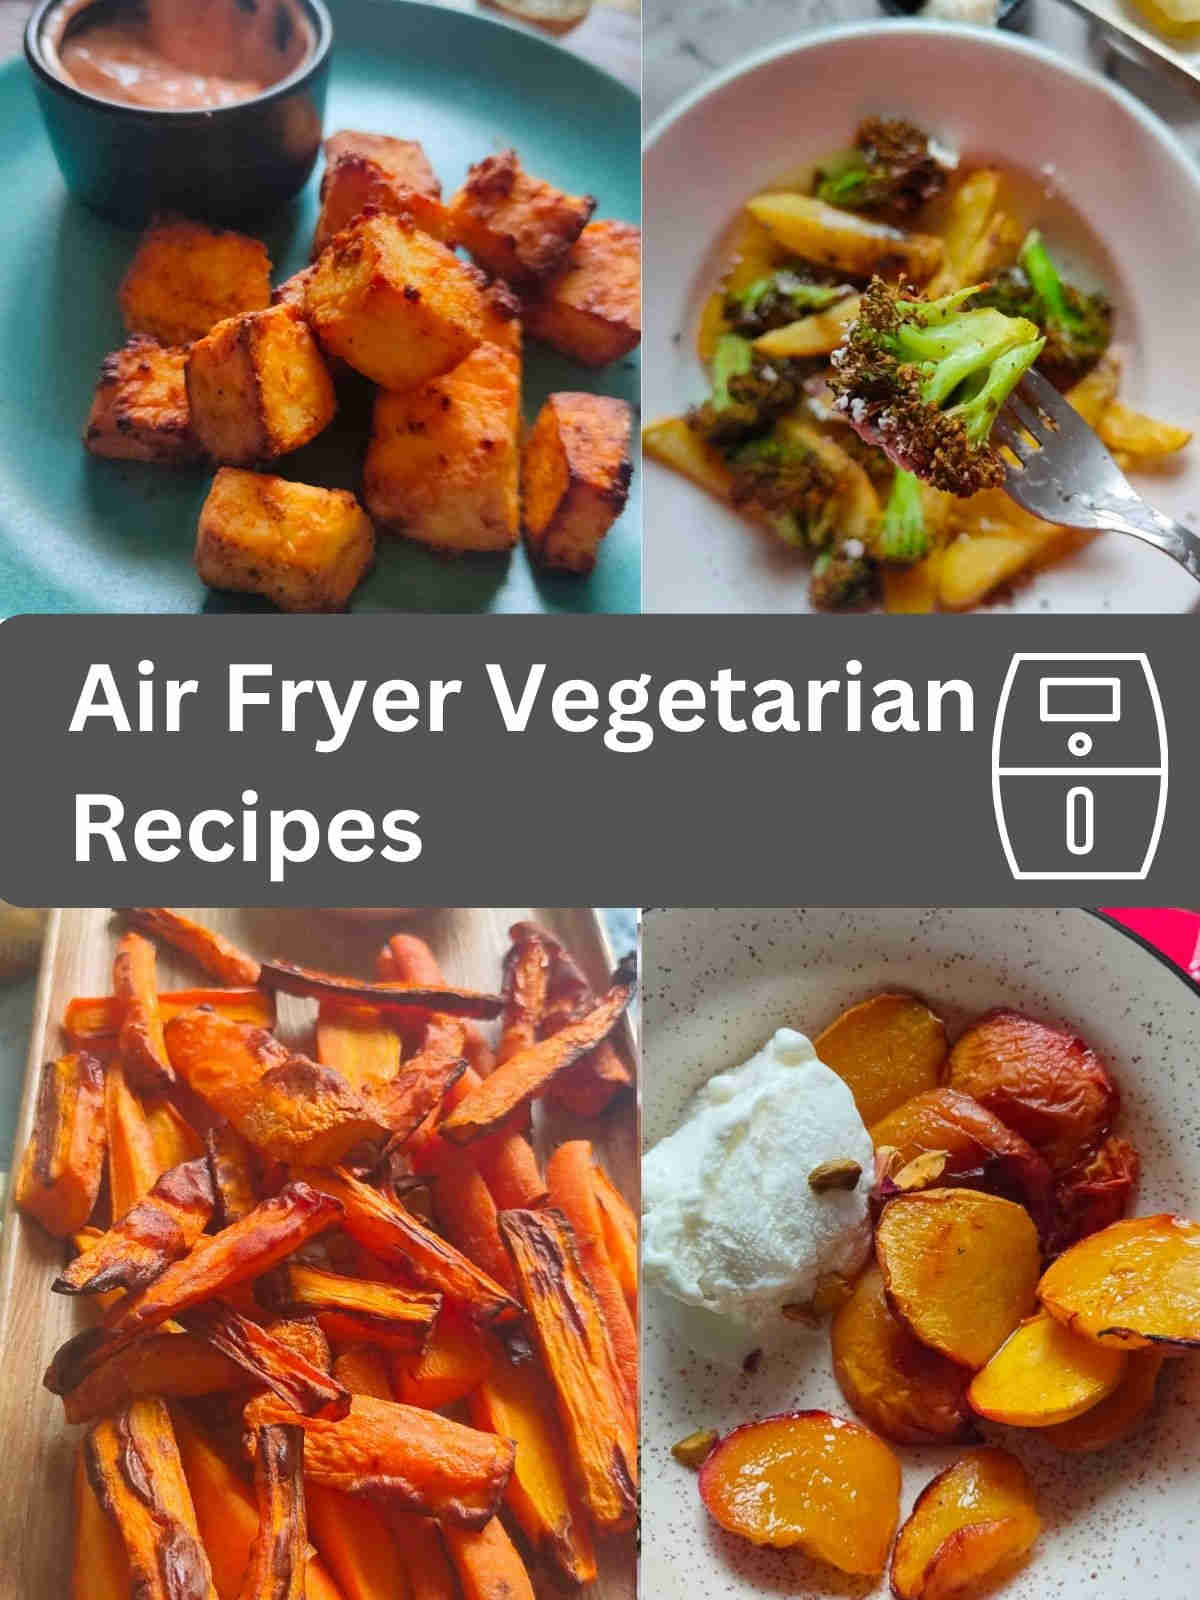 air fryer vegetarian recipes collection